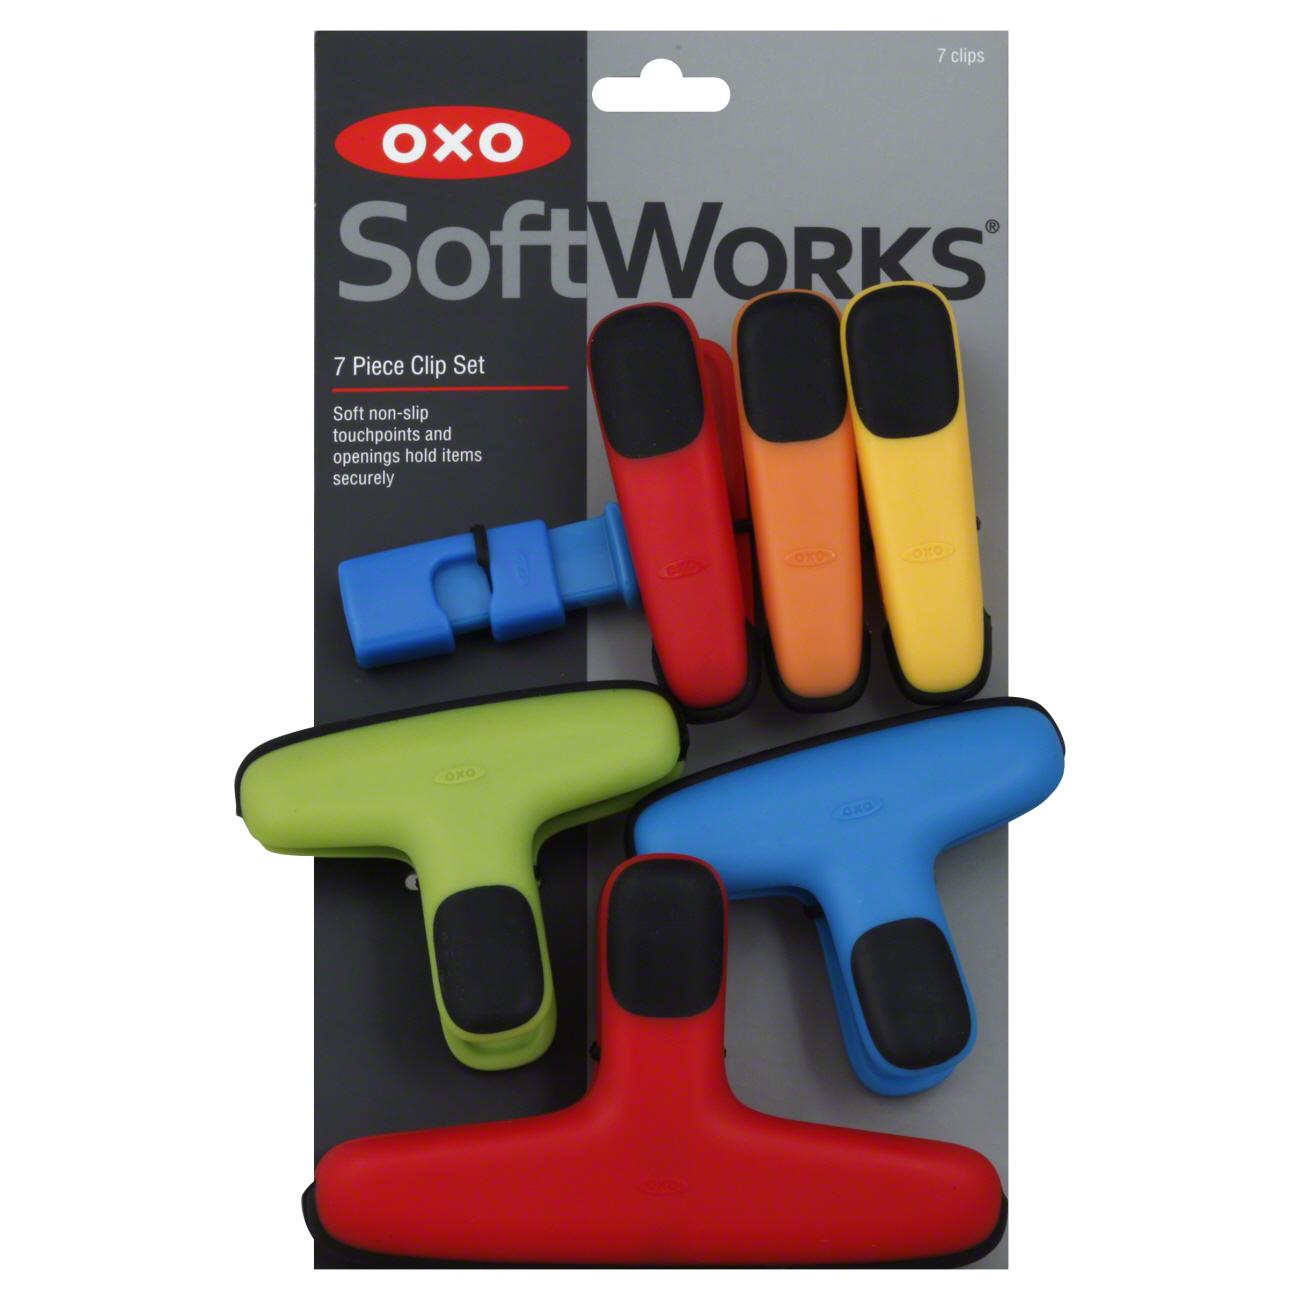 OXO SoftWorks Assorted Chip Clips